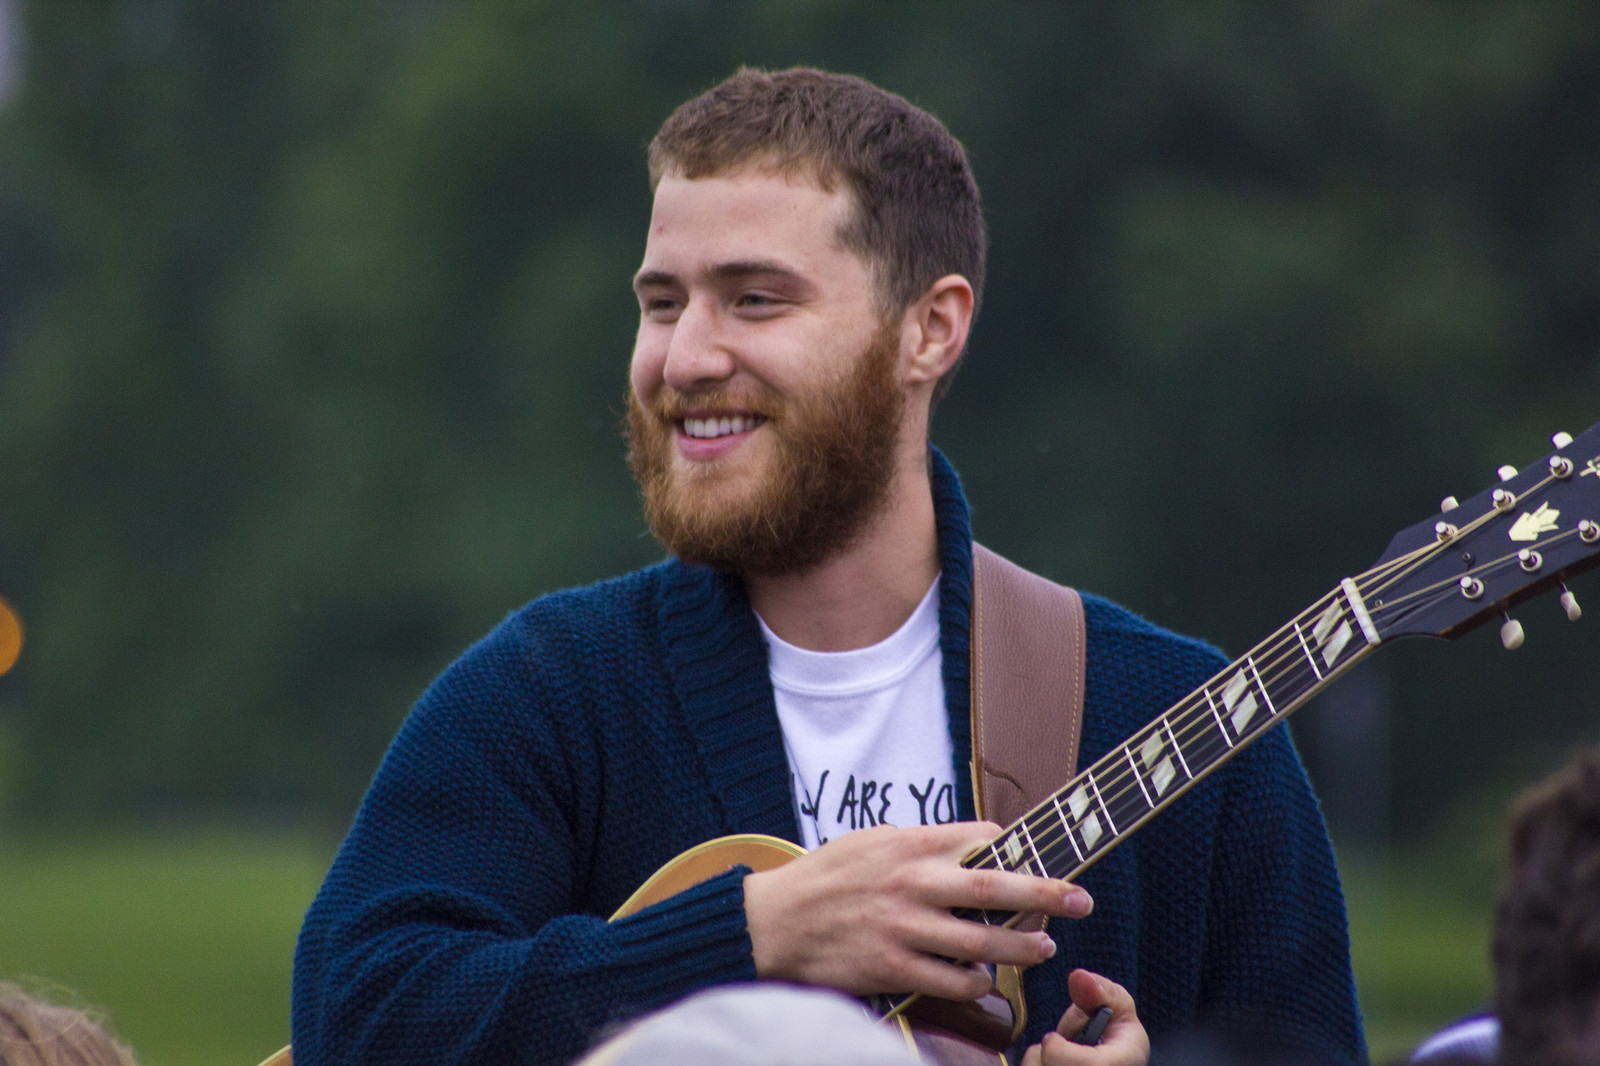 Mike Posner performing at Lincoln Park in Chicago, IL July 8, 2015
Photo by Dan Garcia
TheEarlyRegistration.com
